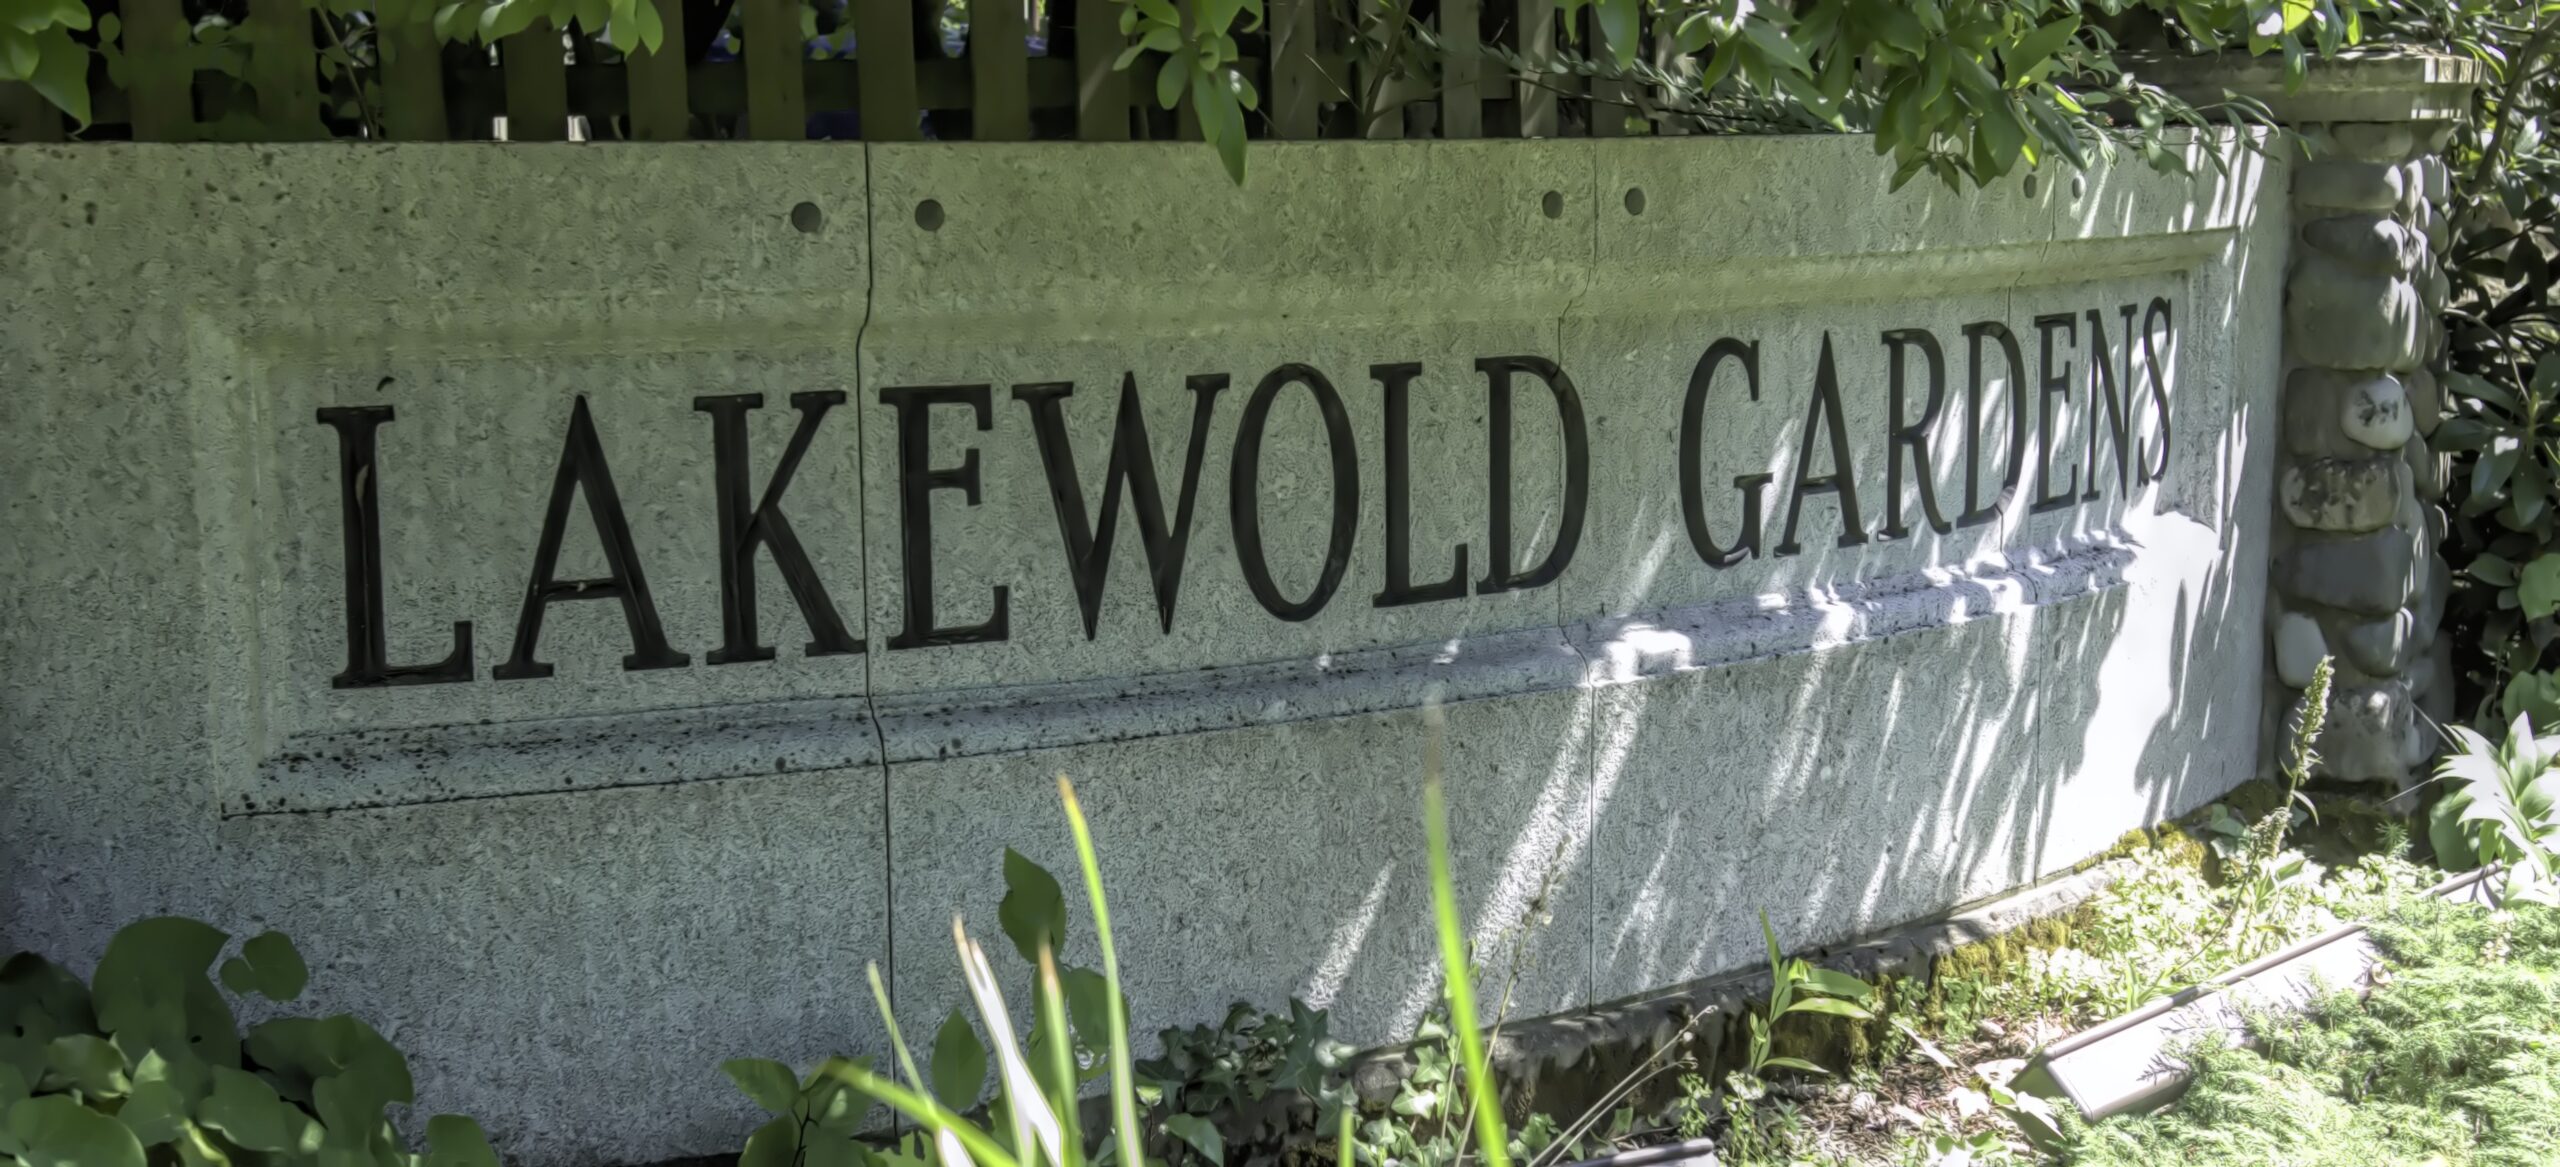 the sign in front of Lakewold Gardens